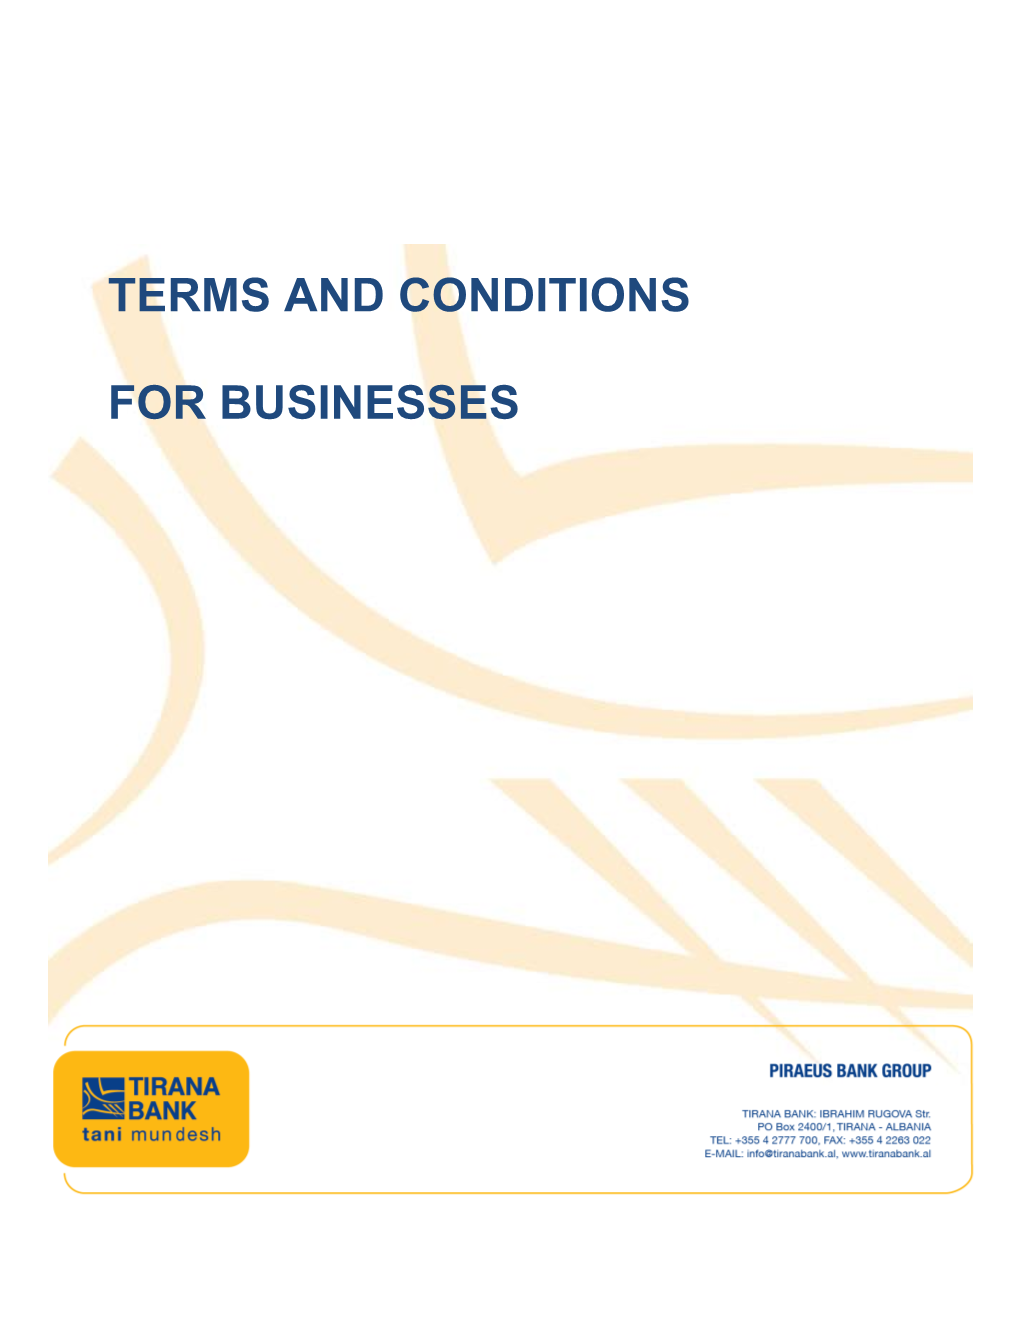 Terms and Conditions for Businesses